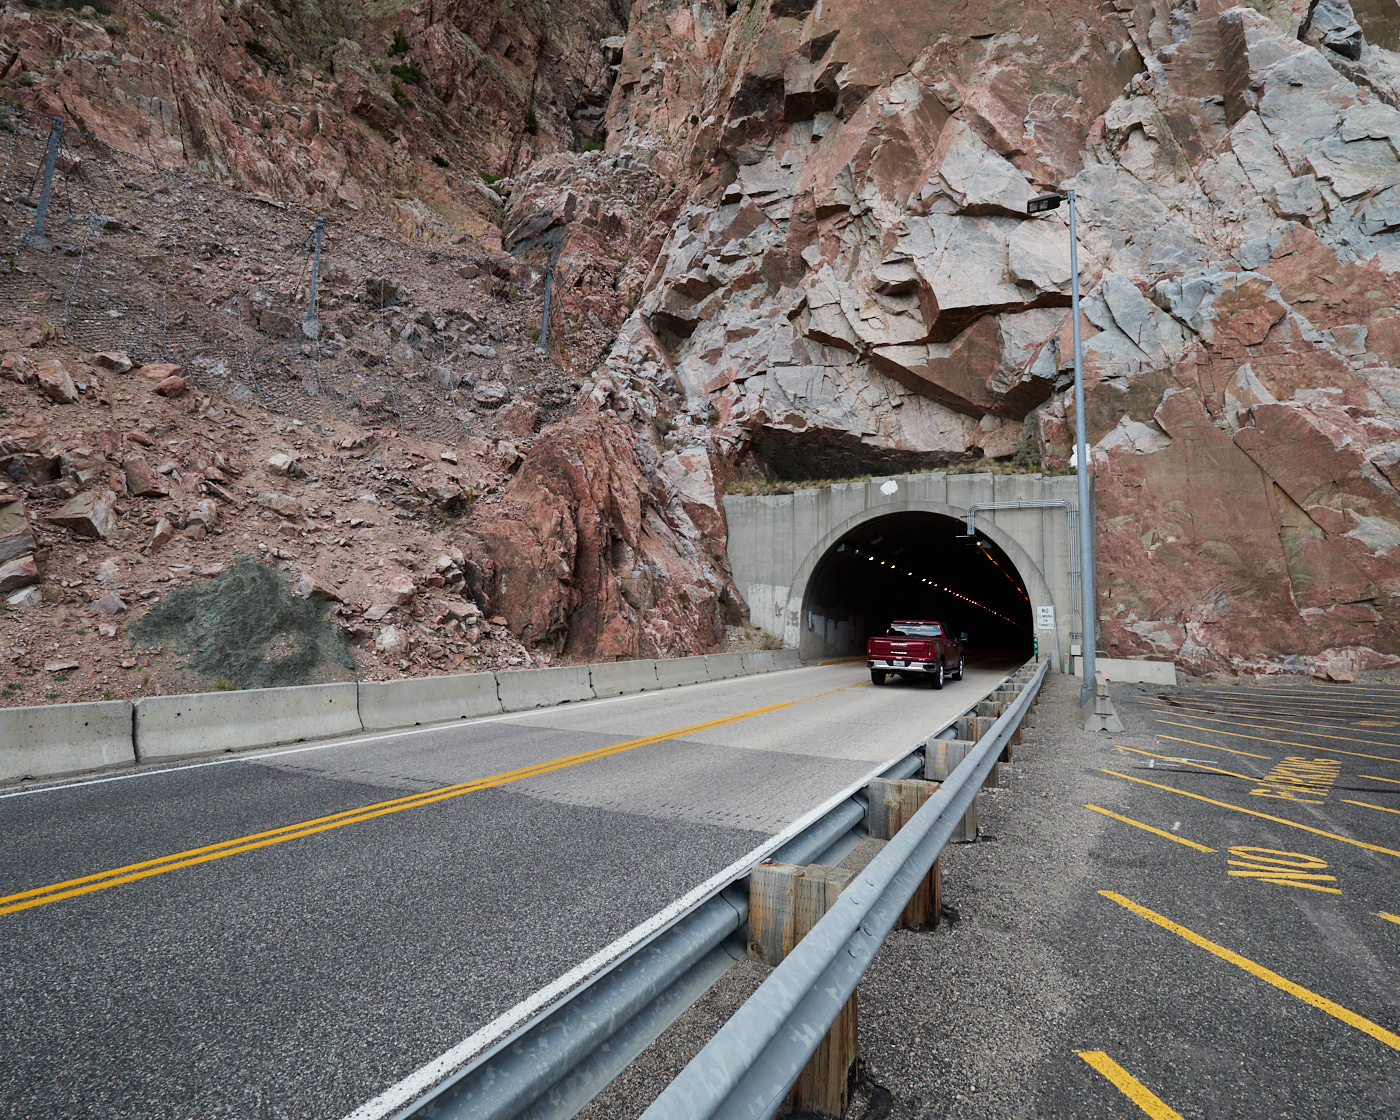 A pickup truck makes its way into the Cody Mountain Tunnel on US Highway 14/16/20